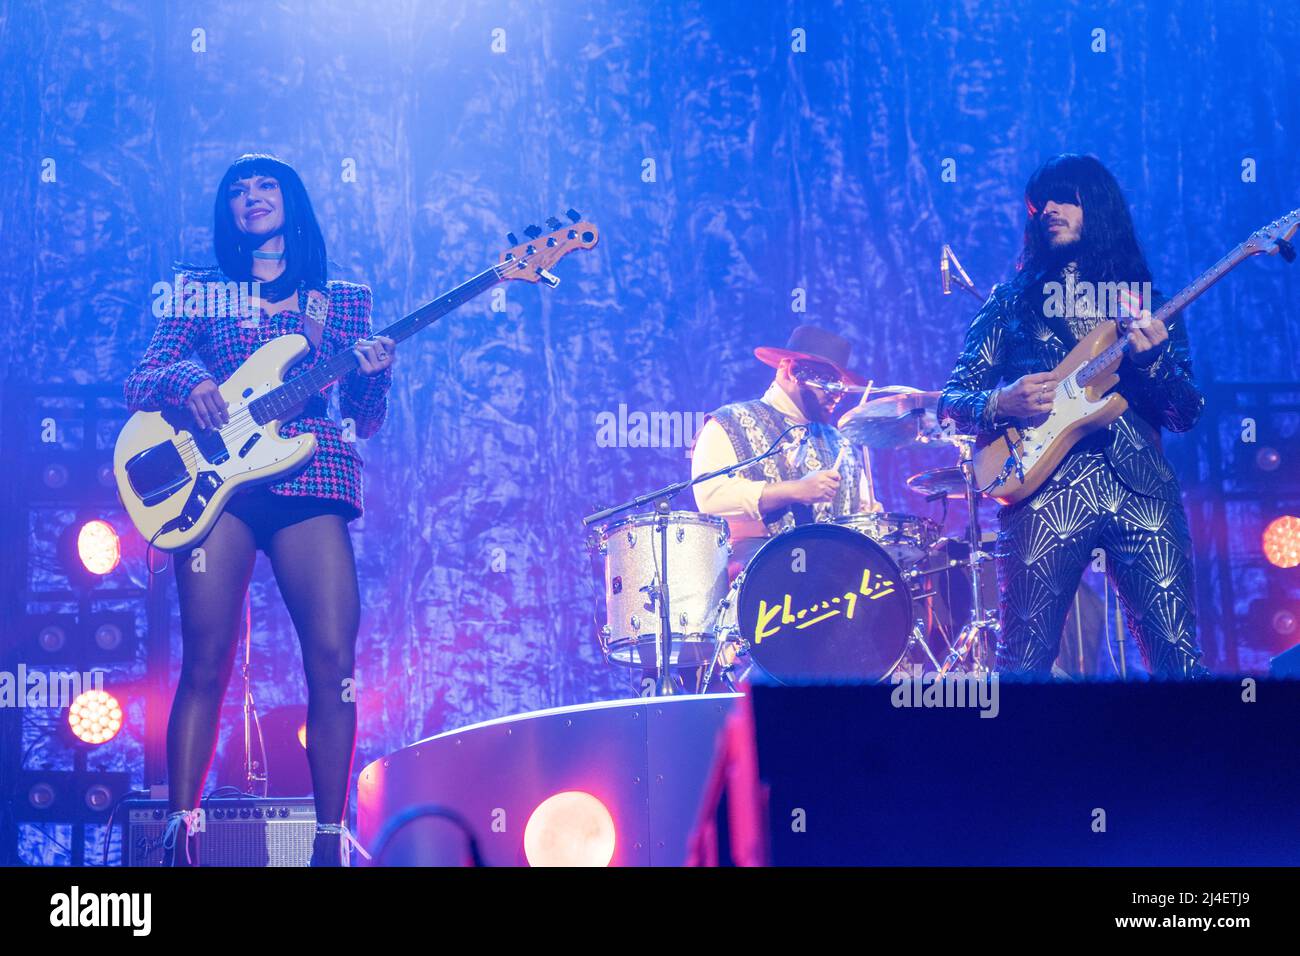 London, UK. April 14th, 2022. Khruangbin performing live on stage at Alexandra Palace in London. Photo: Richard Gray/Alamy Stock Photo